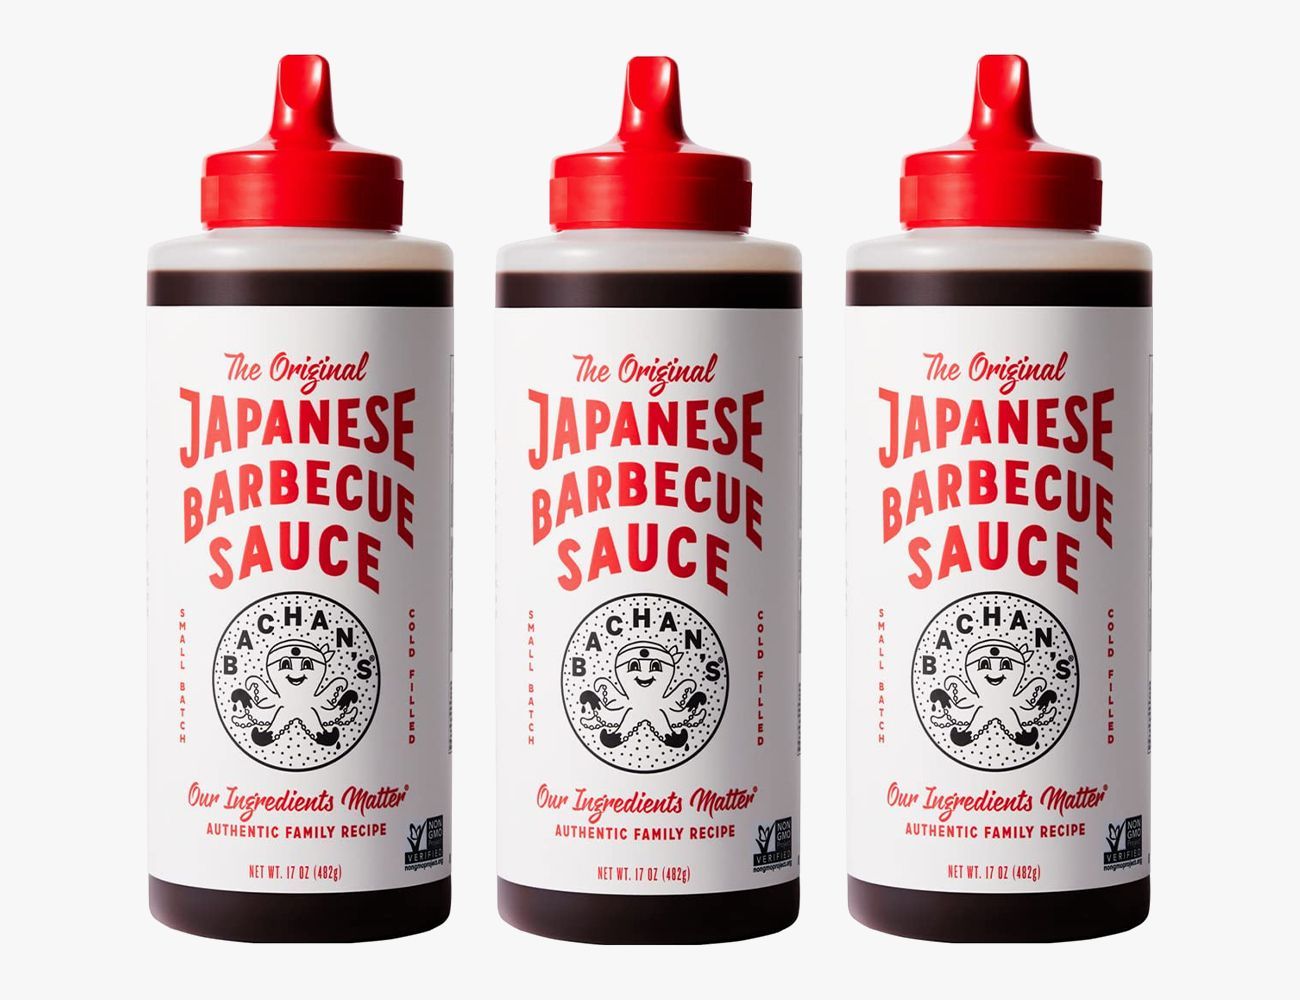 https://hips.hearstapps.com/vader-prod.s3.amazonaws.com/1683663021-bachan-s-3-pack-original-japanese-barbecue-sauce-645aa8975dcaf.jpg